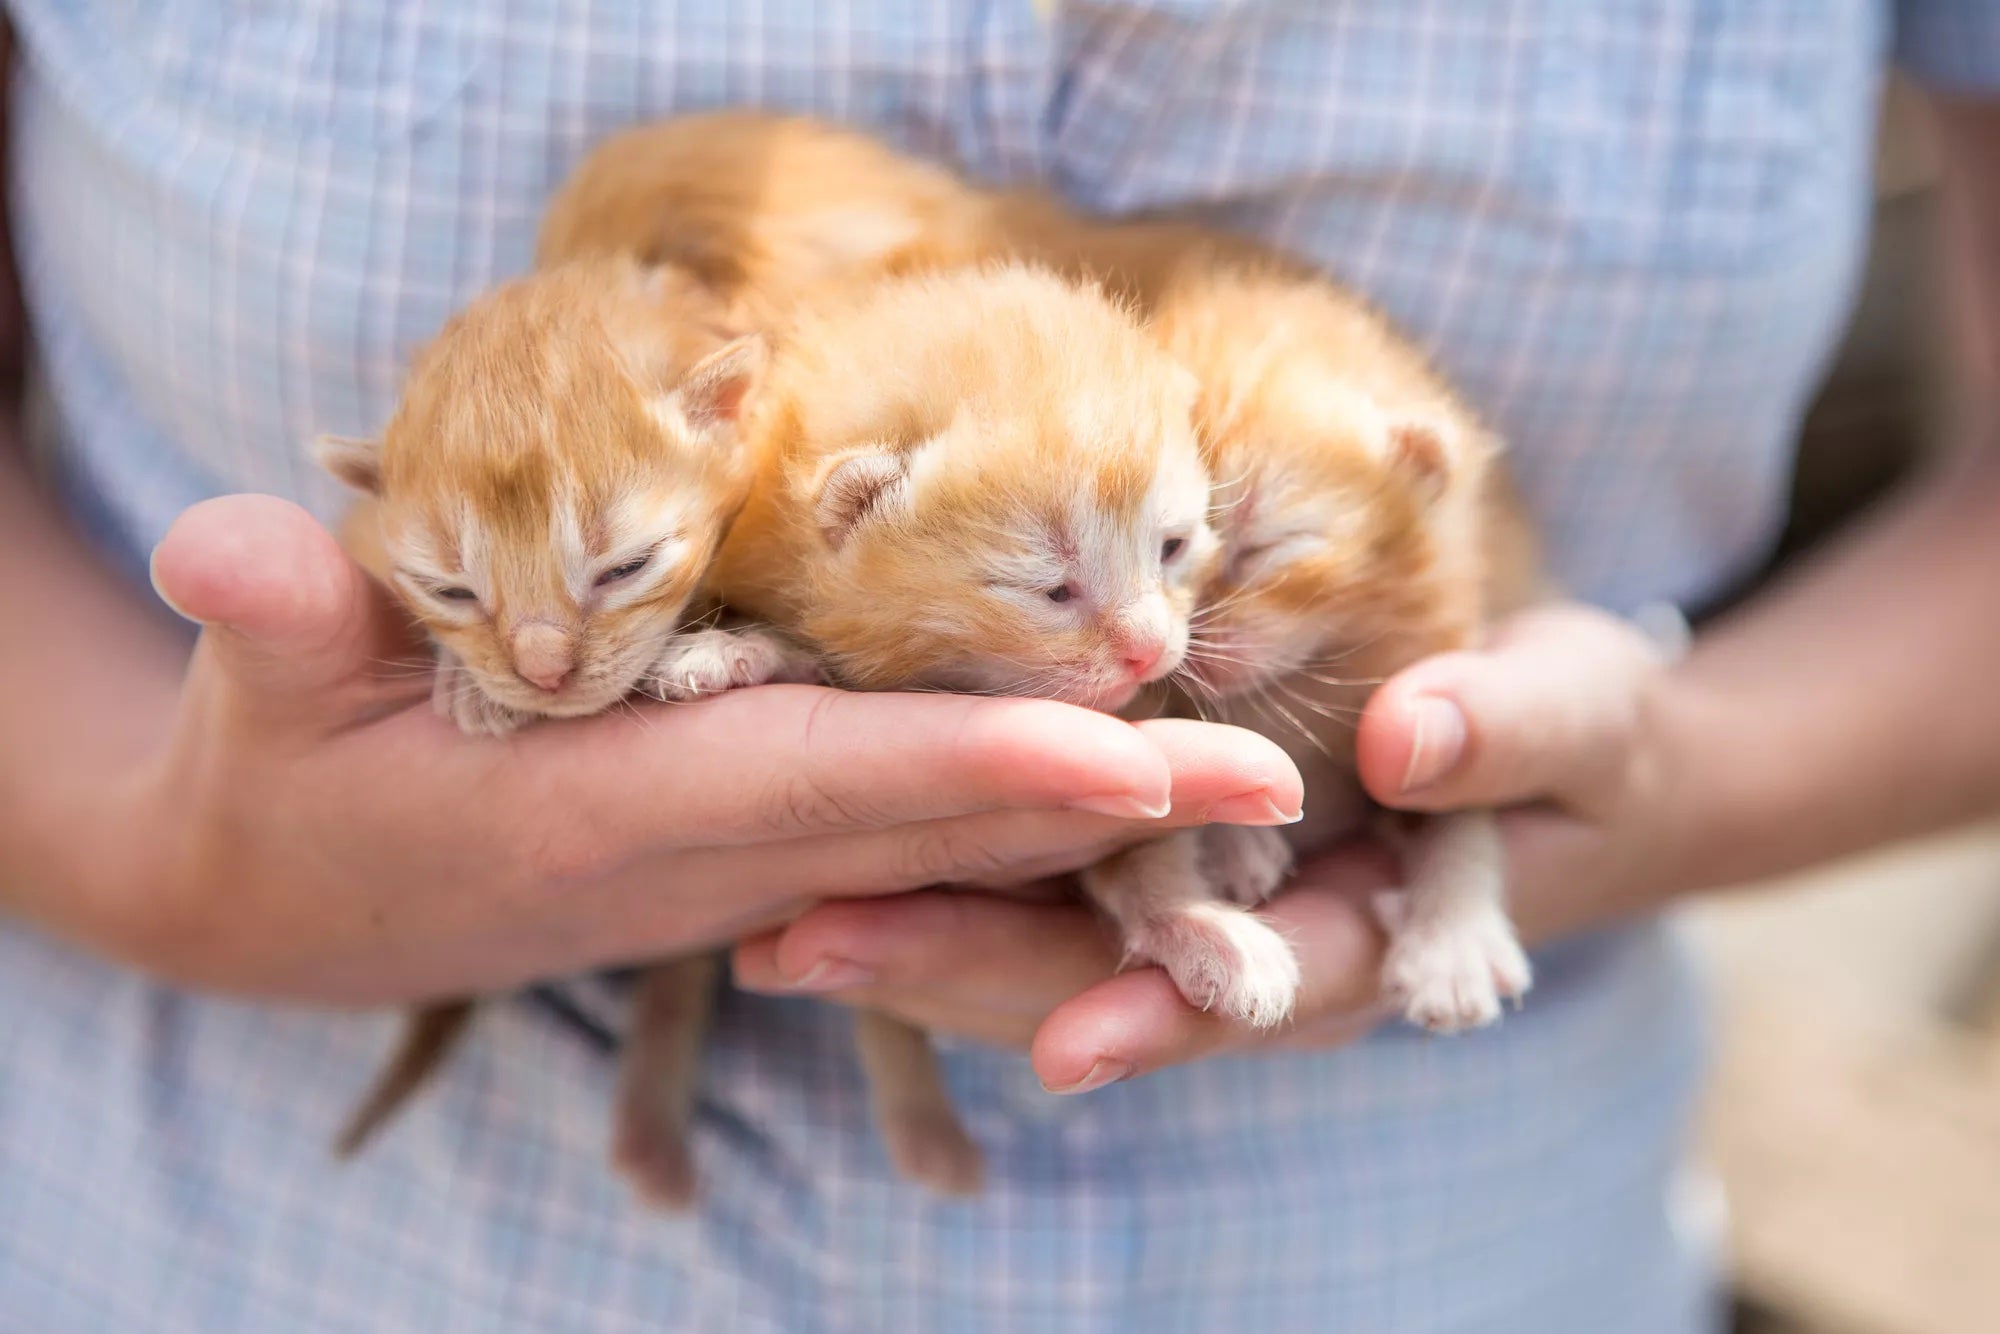 how to take care of a kitten: raising a kitten